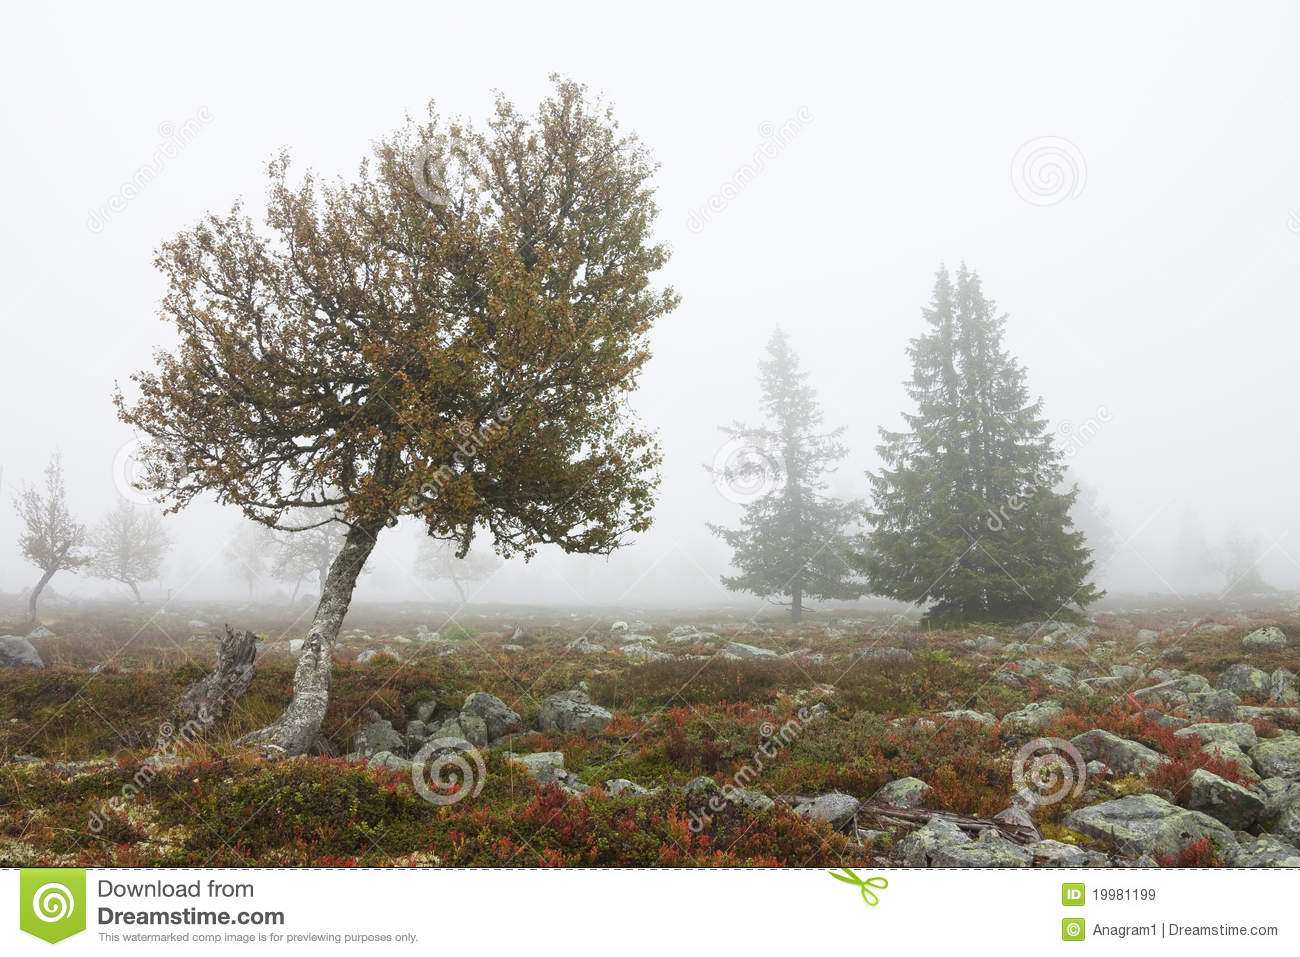 Foggy Landscape With Trees In Fall Royalty Free Stock Images   Image